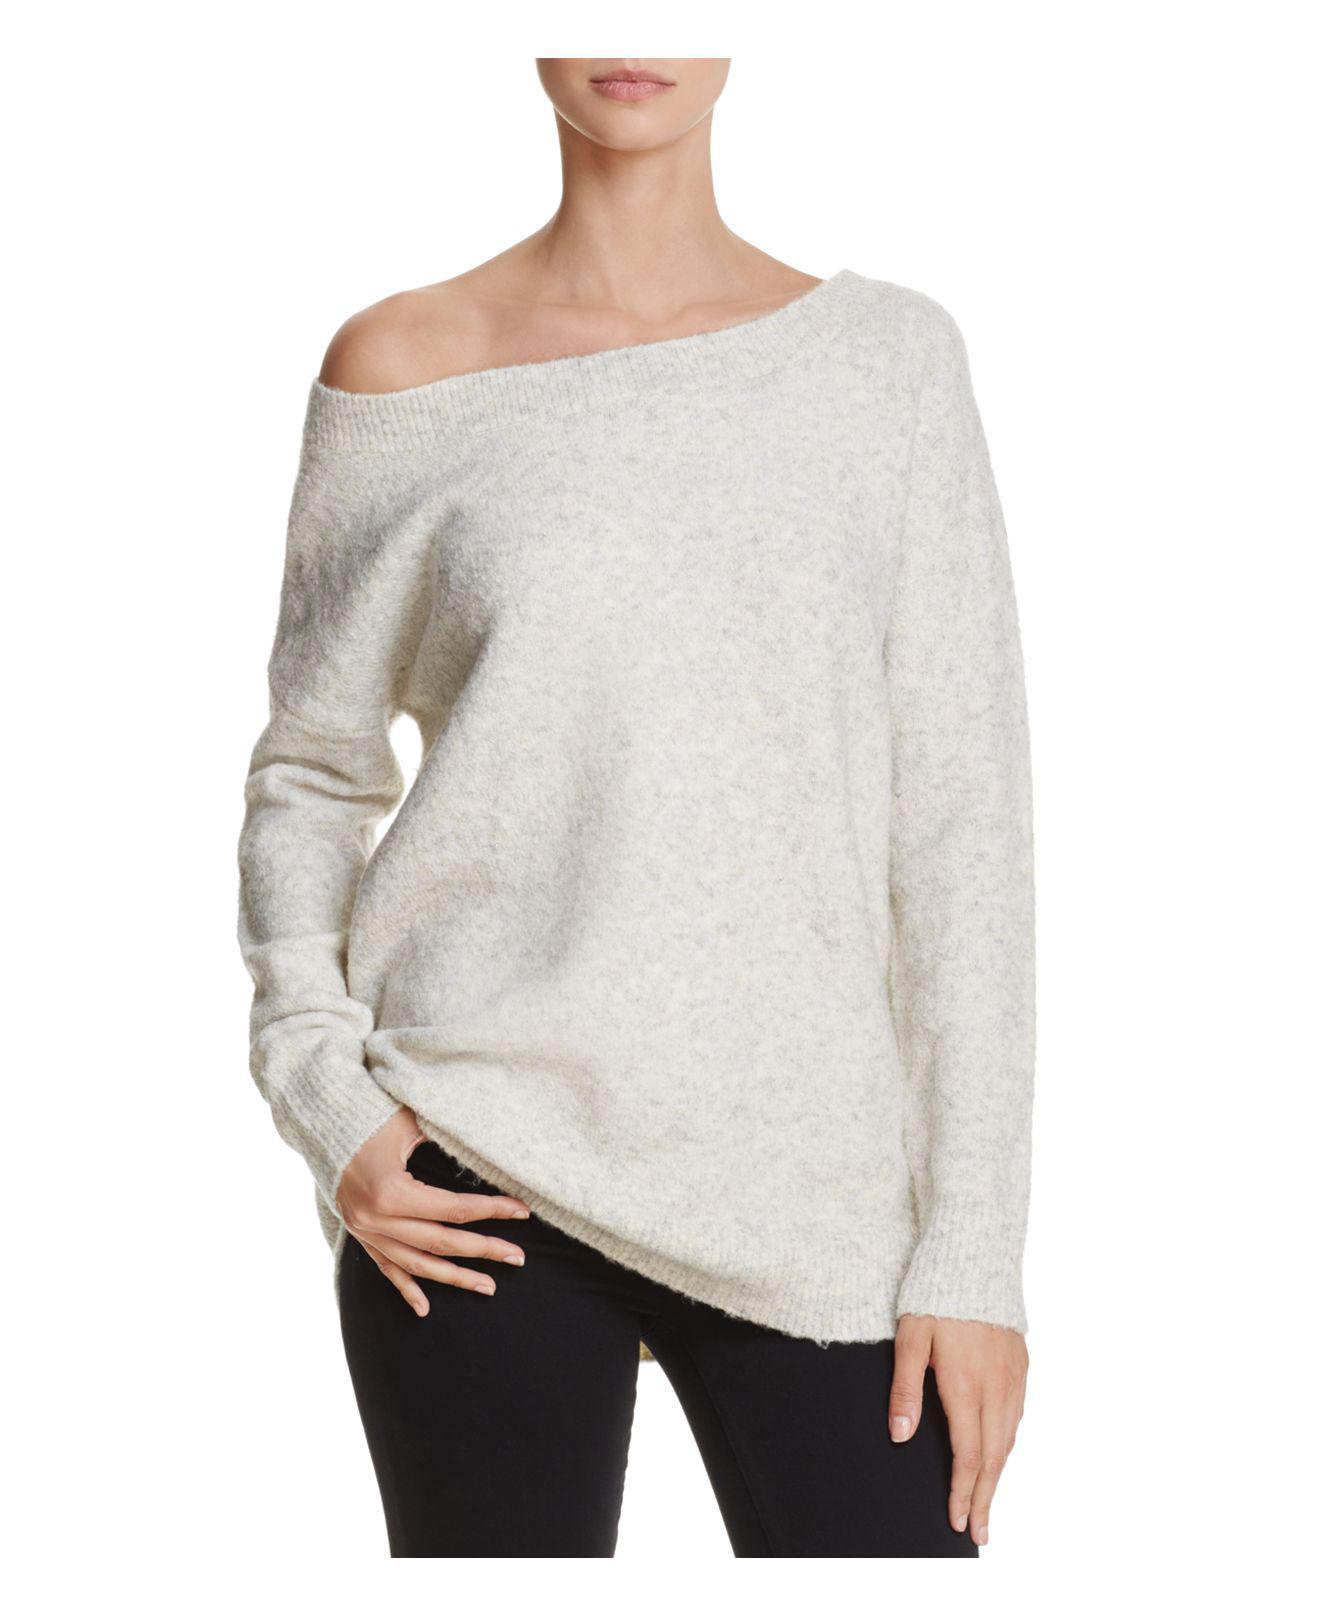 Lyst - French Connection Urban Flossy One-shoulder Sweater